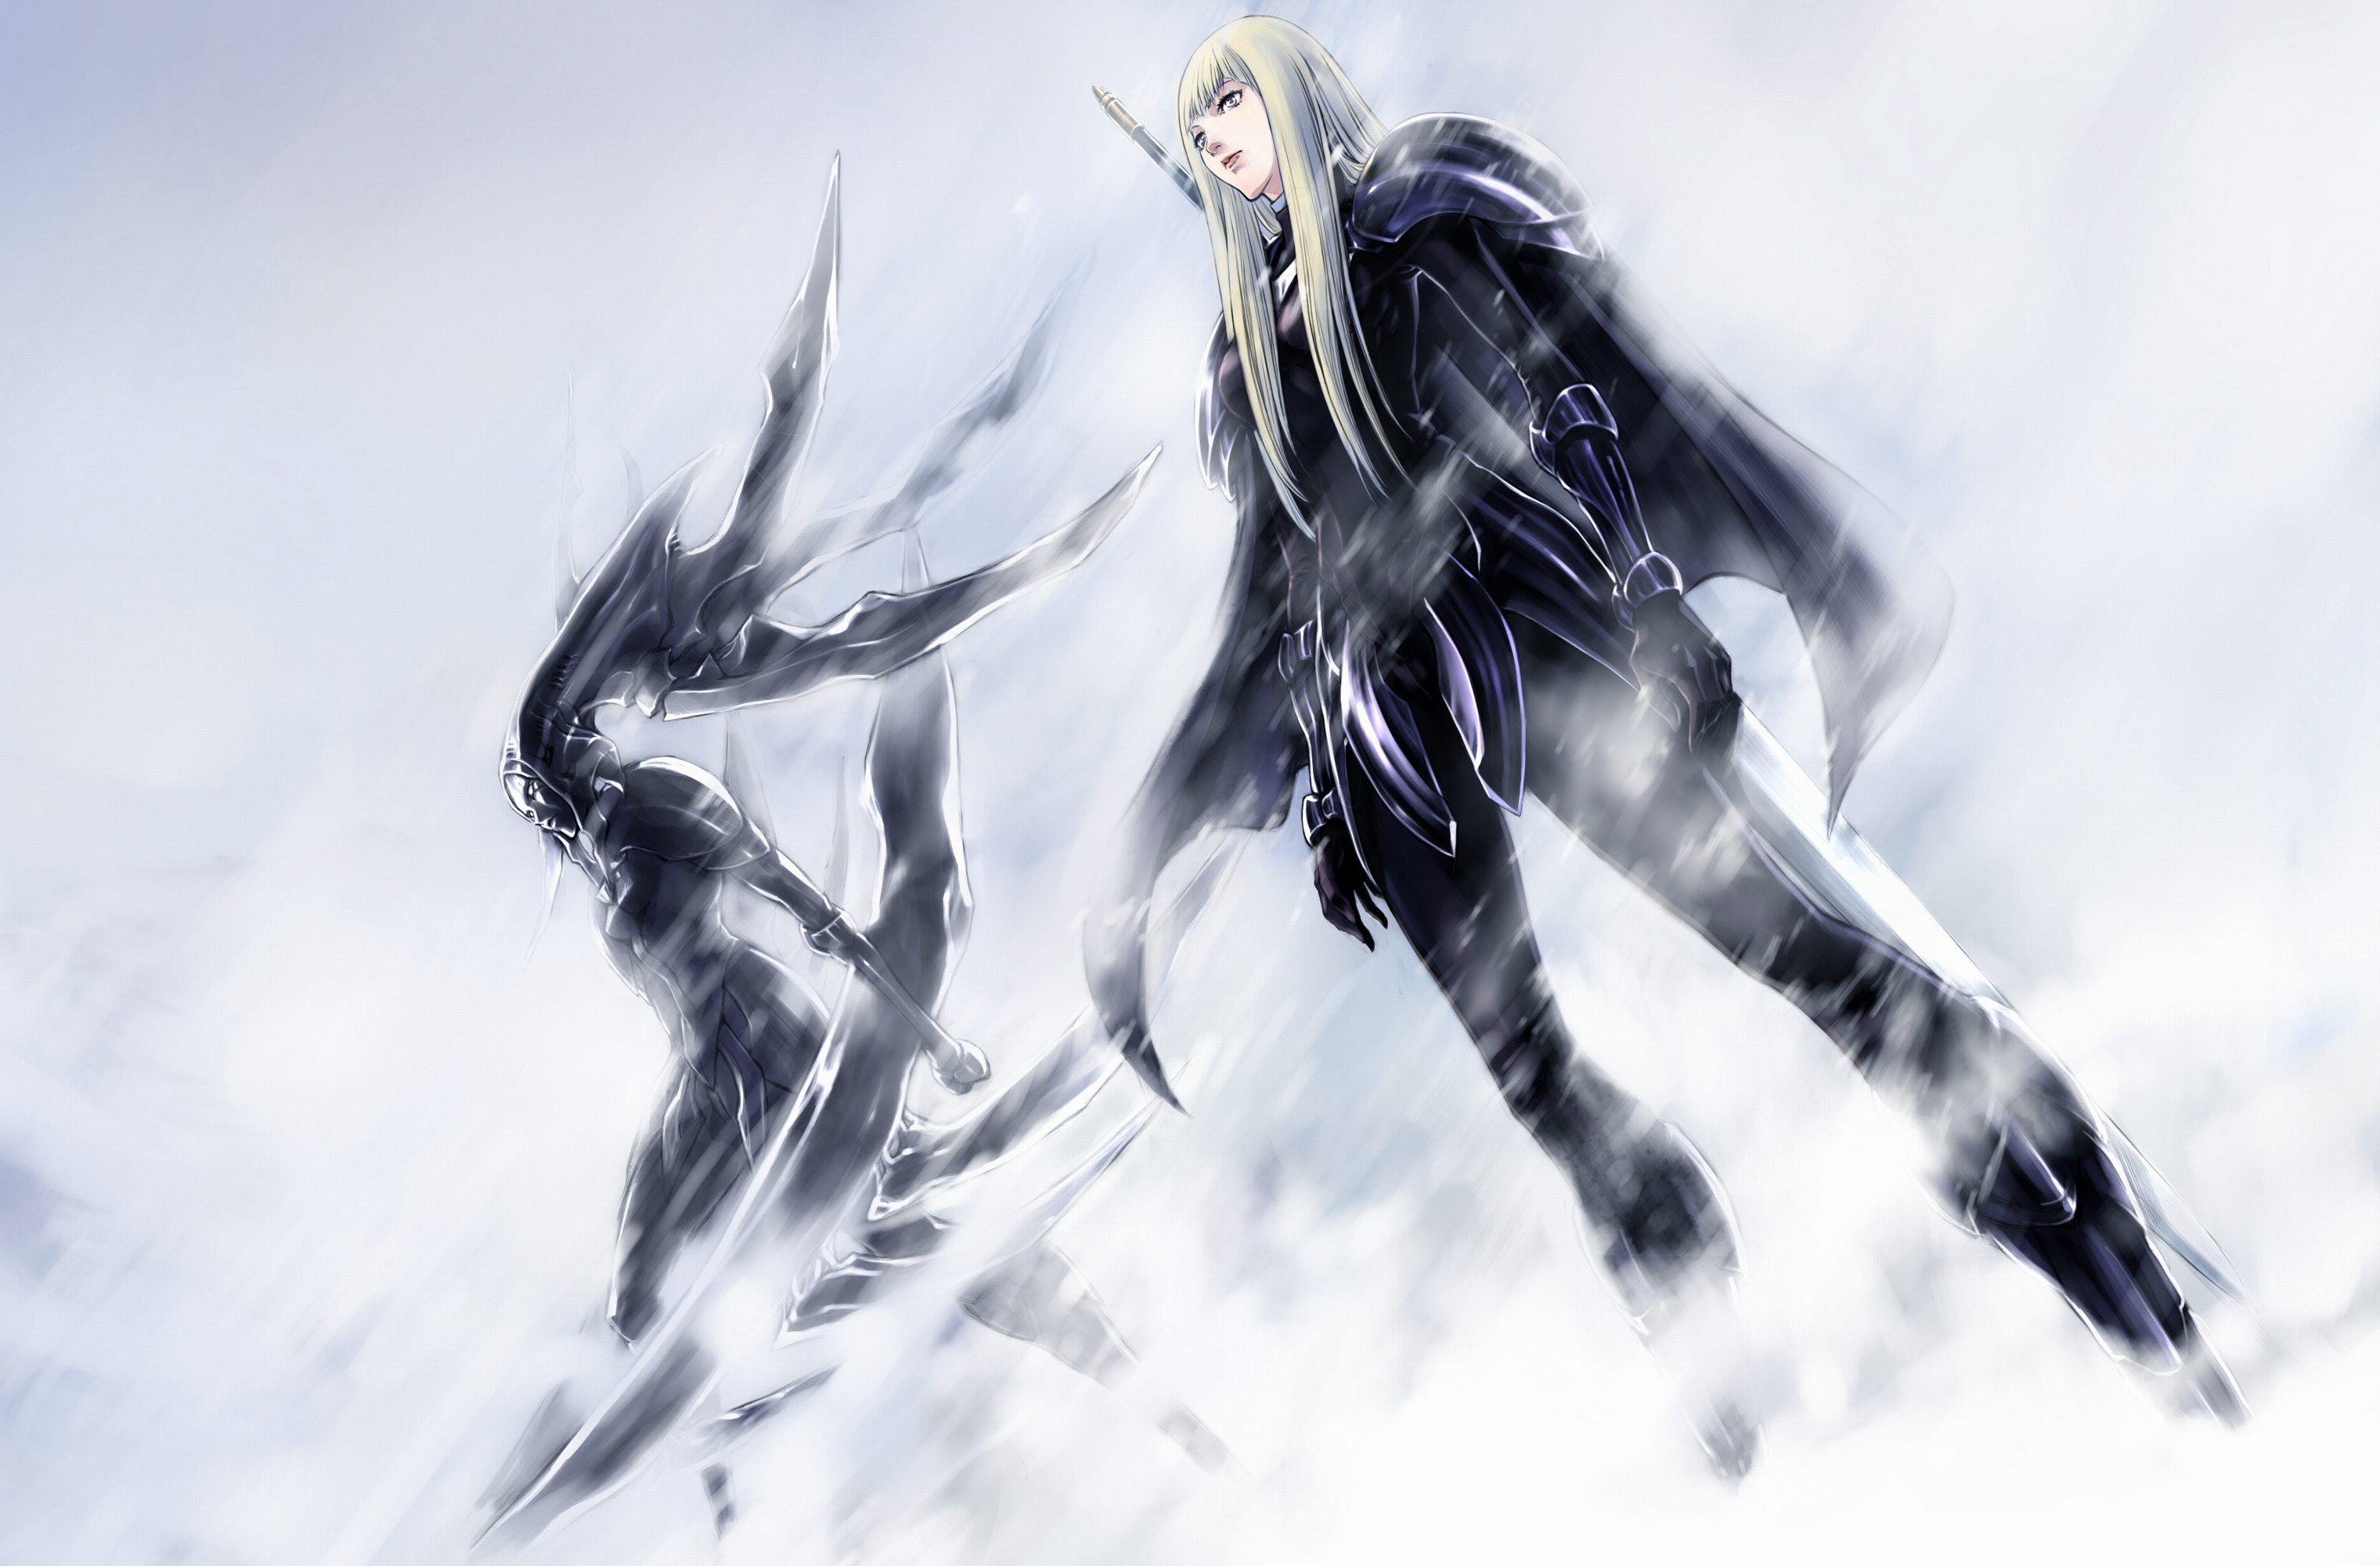 Claymore Wallpapers